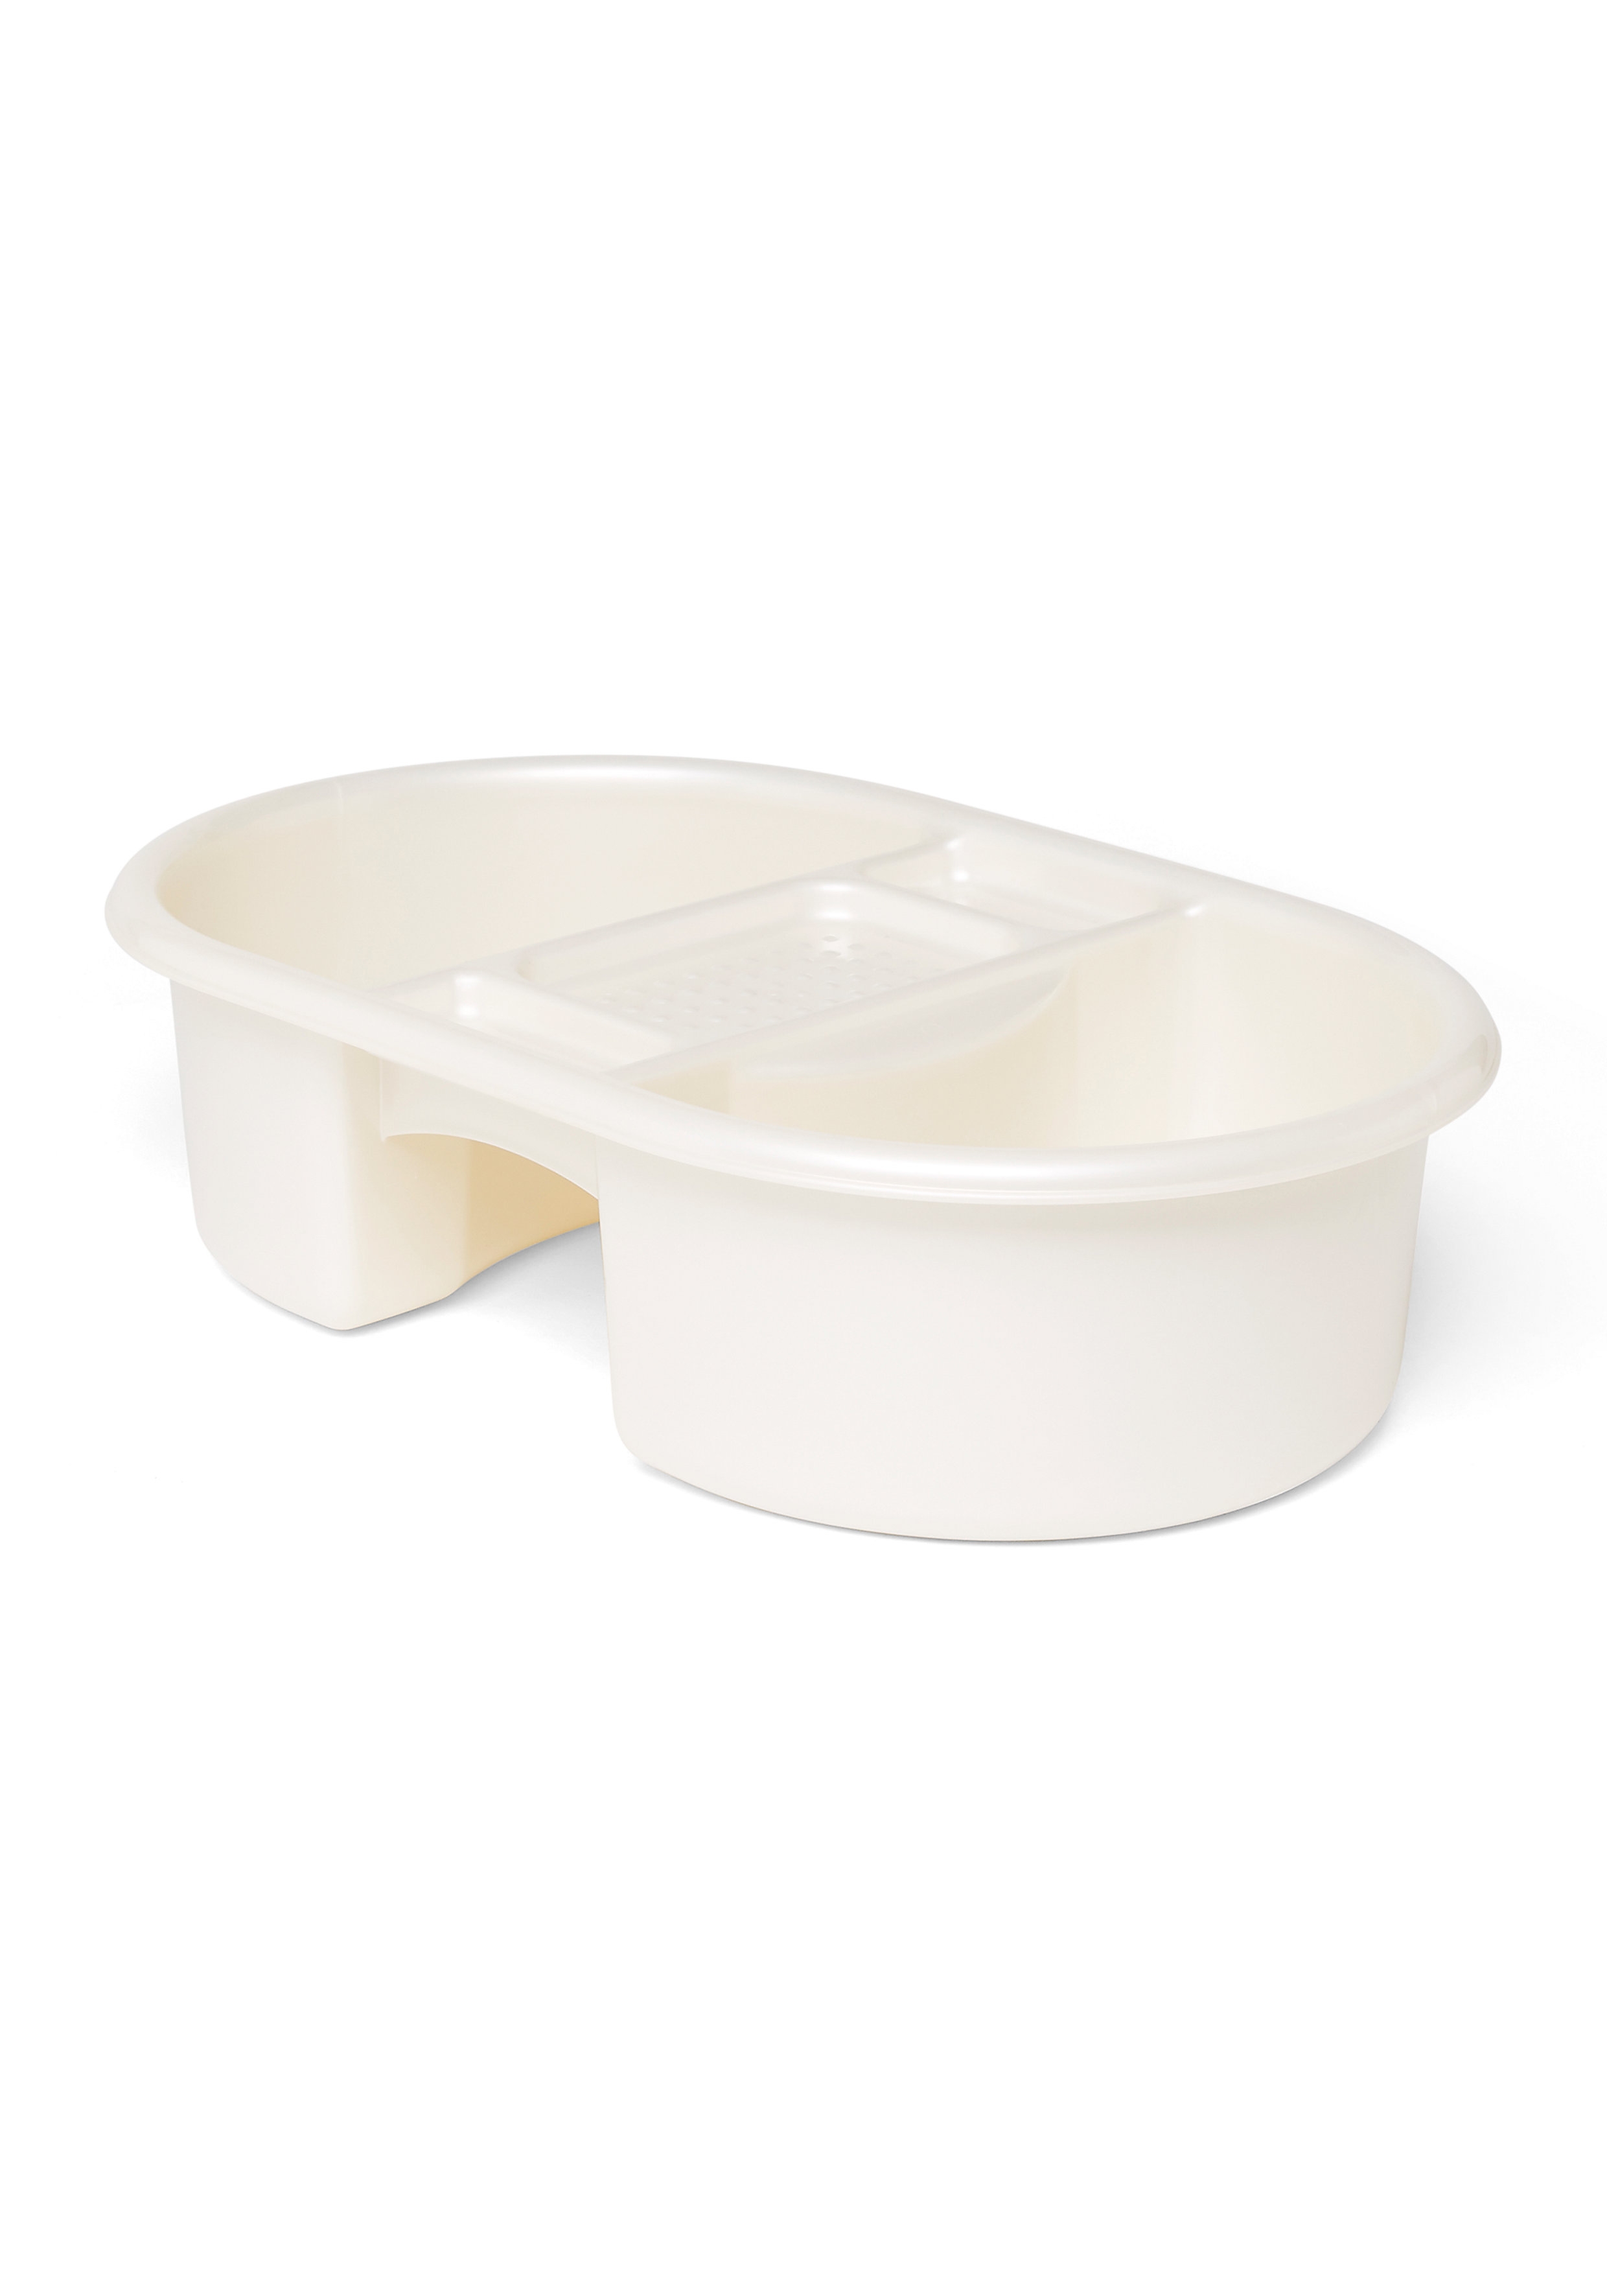 Mothercare | Mothercare New Bear Top N Tail Bowl White 0